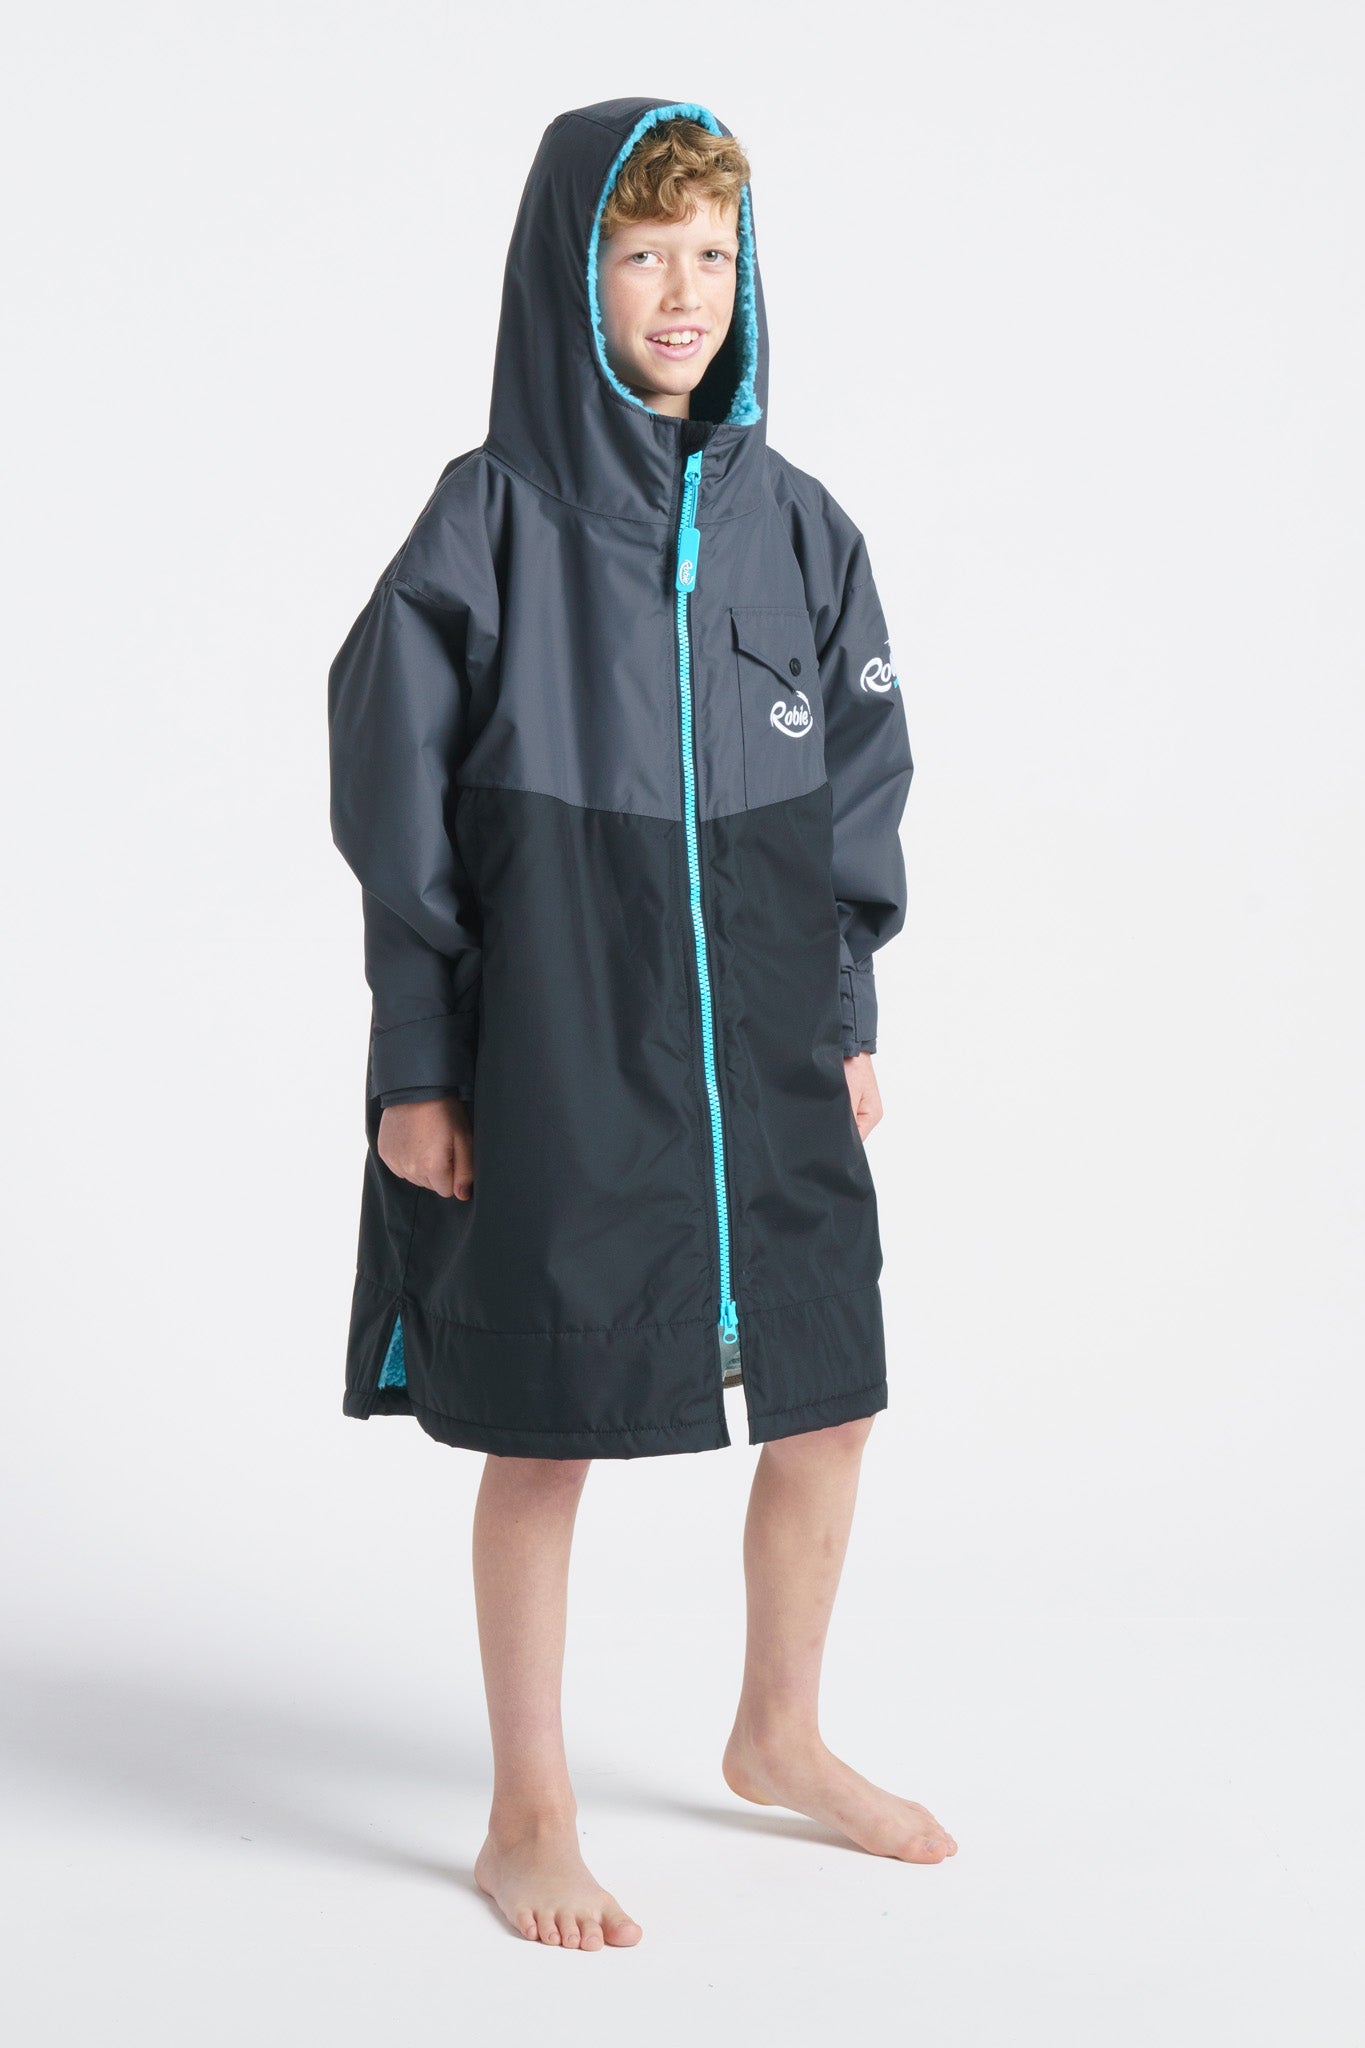 robie-robes-dry-series-changing-robe-waterproof-preorder-product-blacksheepsurfco-galway-ireland-charcoal-blue-atoll-junior